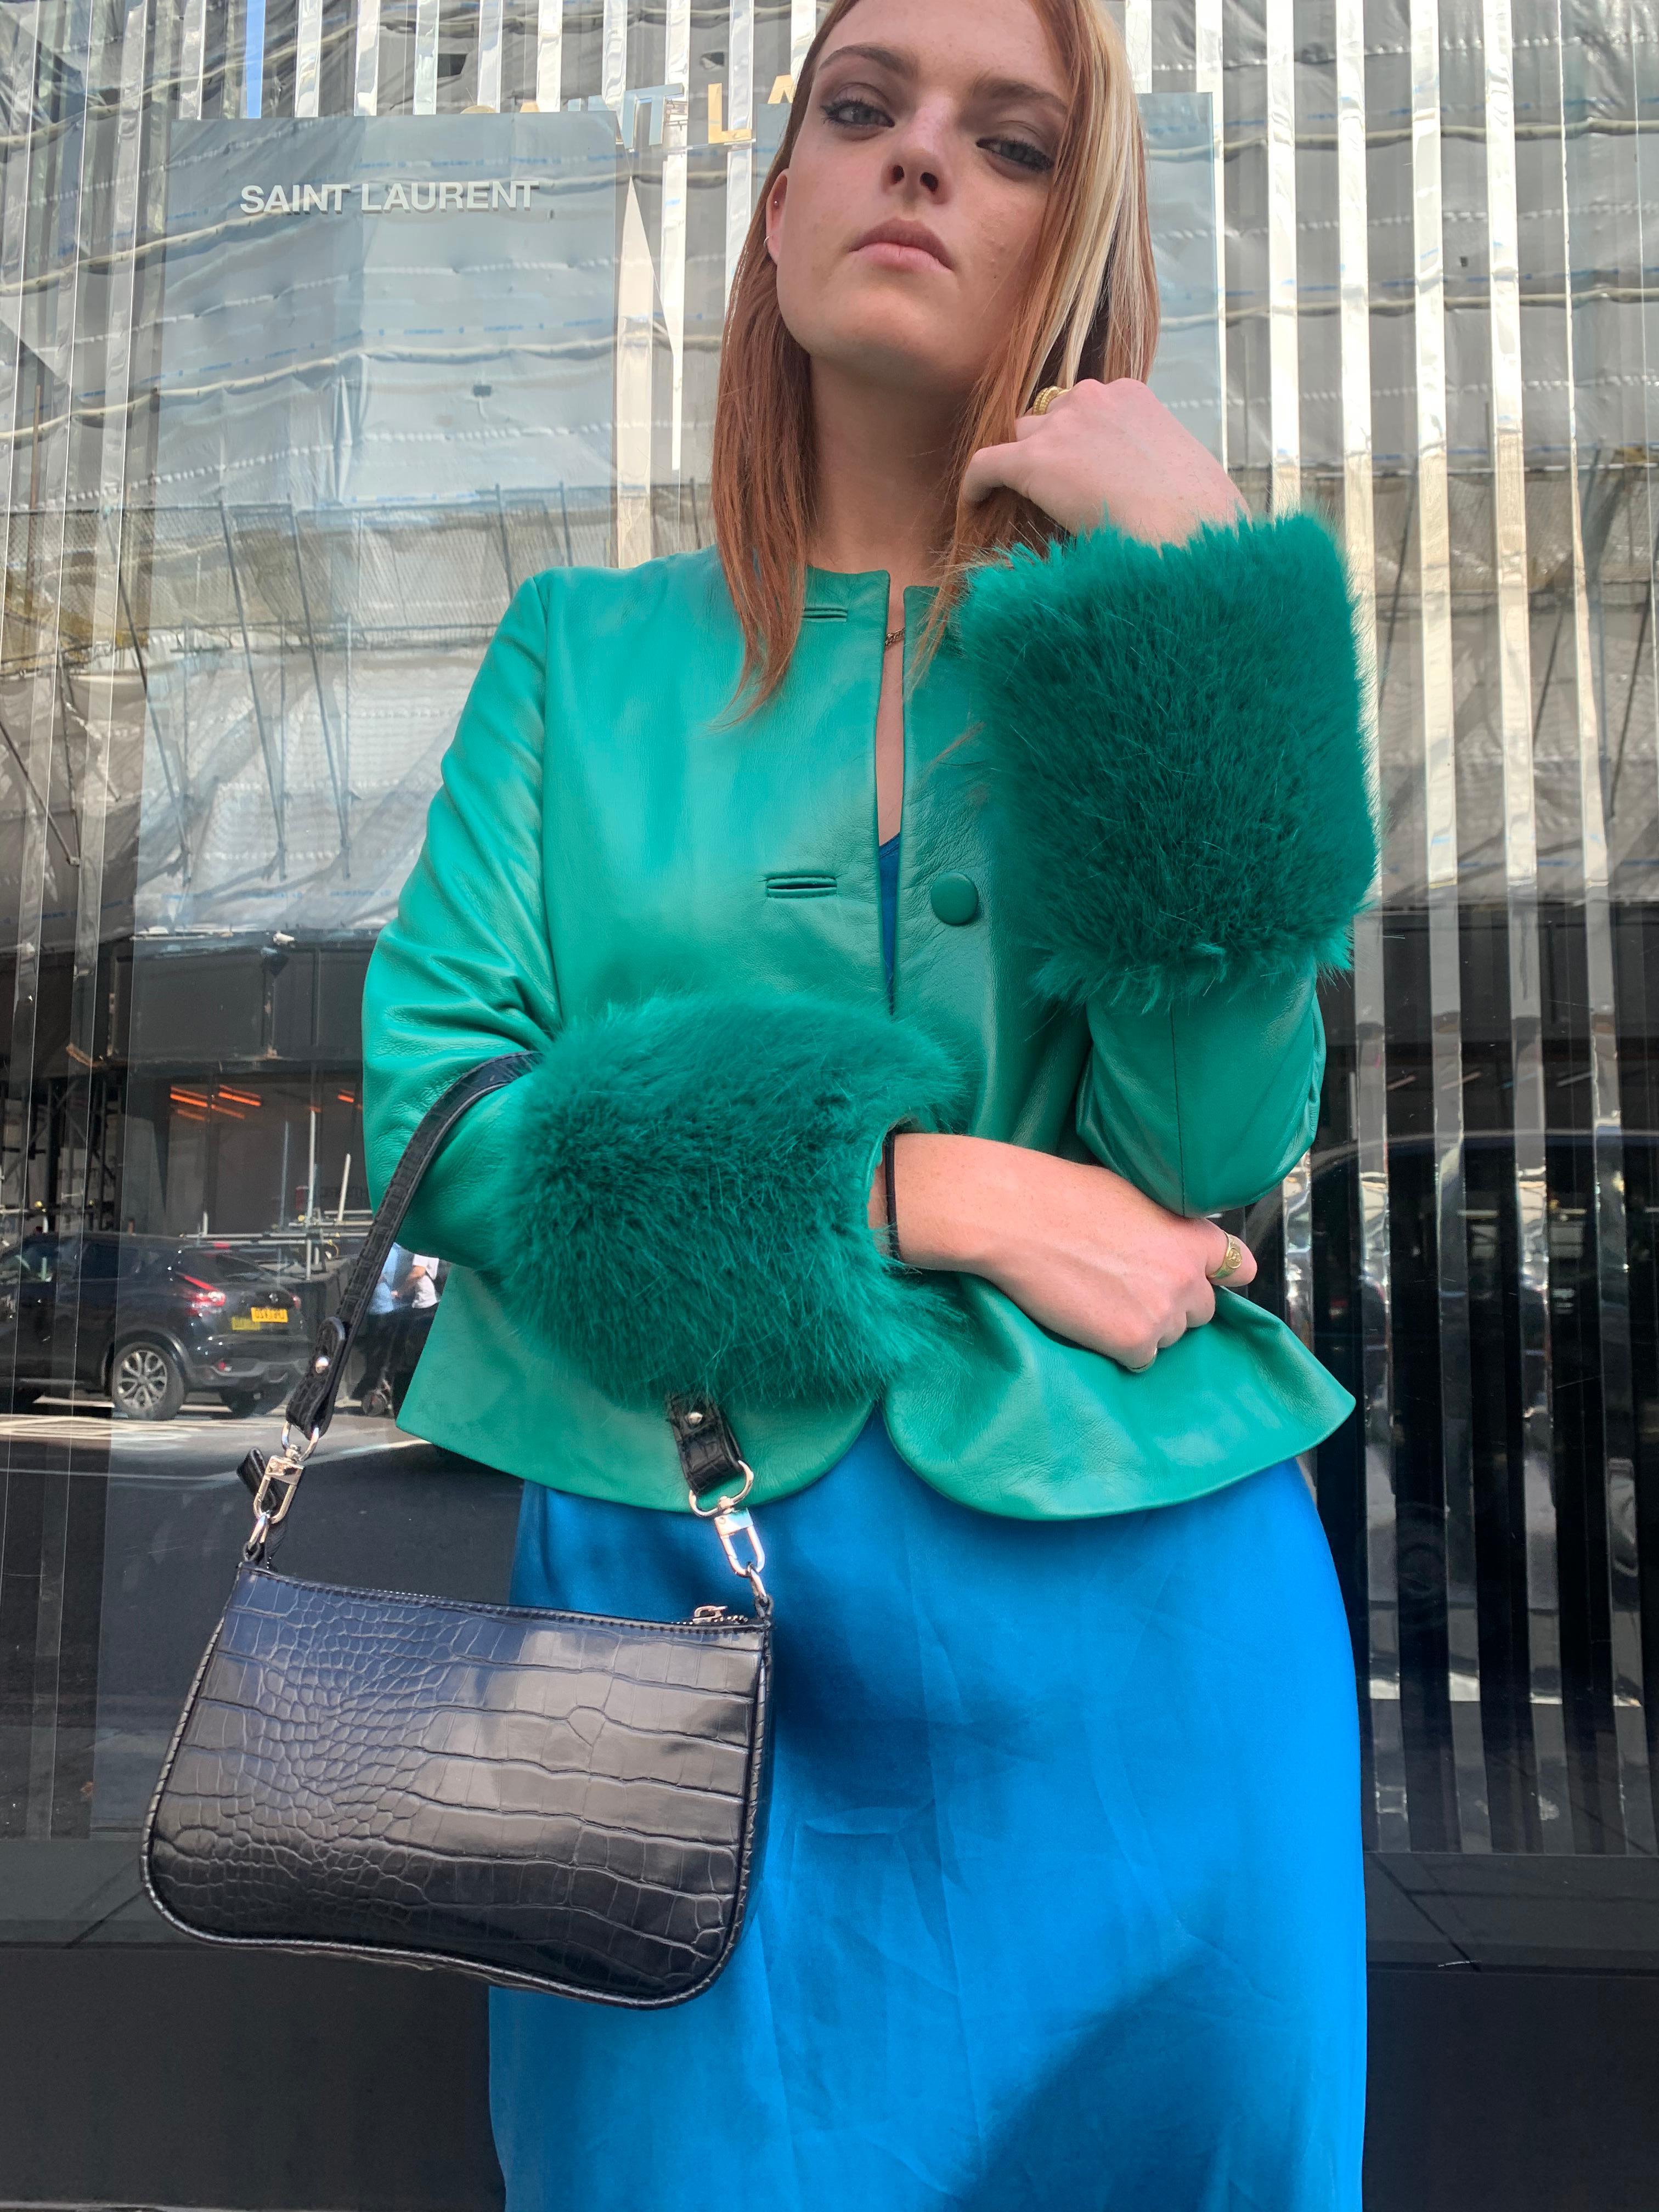 Verheyen Vita Cropped Jacket in Emerald Green Leather with Faux Fur - Size uk 12

Handmade in London, made with 100% Italian Lambs Leather and the highest quality of faux fur to match, this luxury item is an investment piece to wear for a lifetime. 